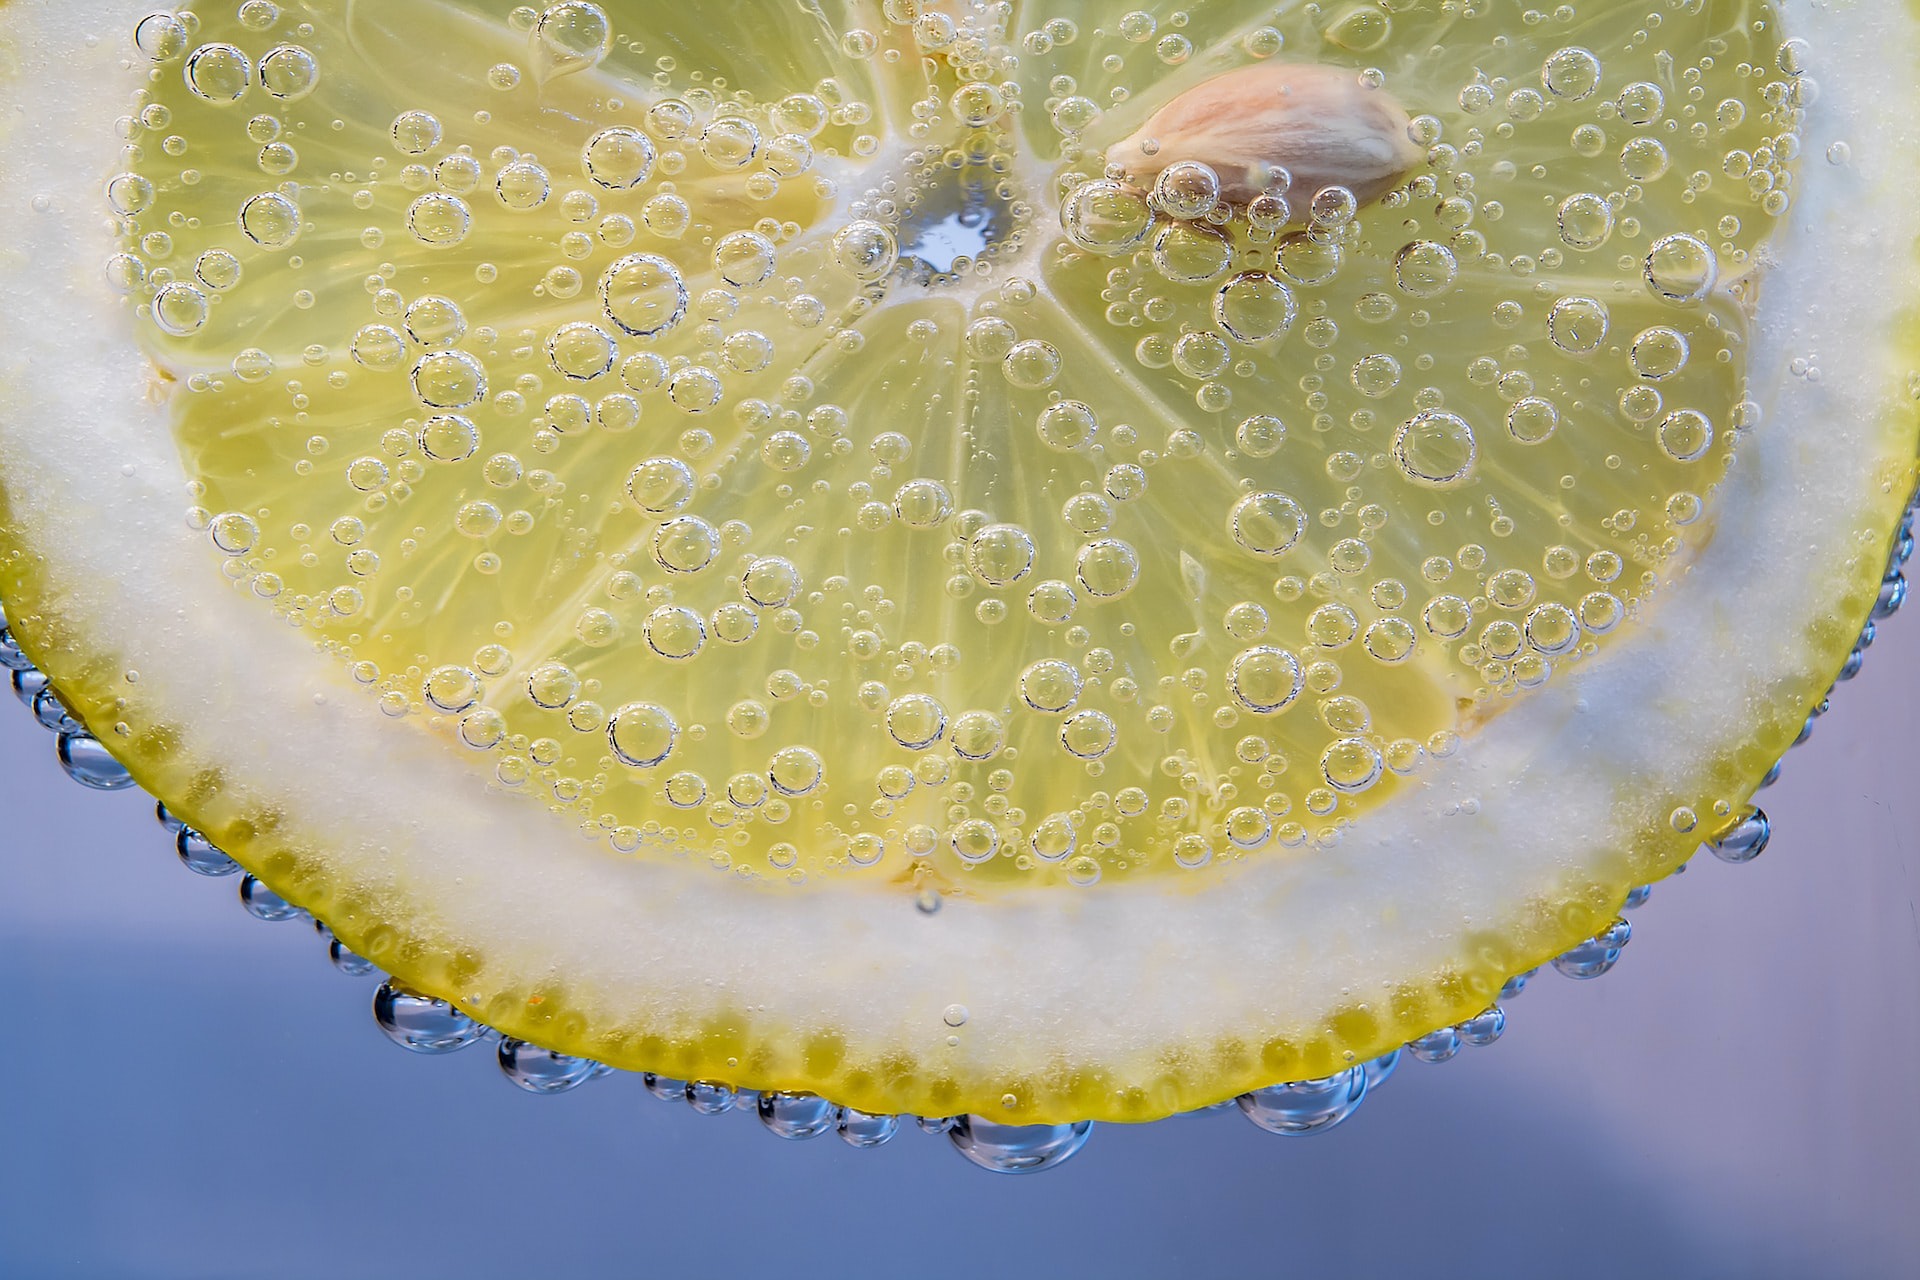 yellow lemon with water droplets